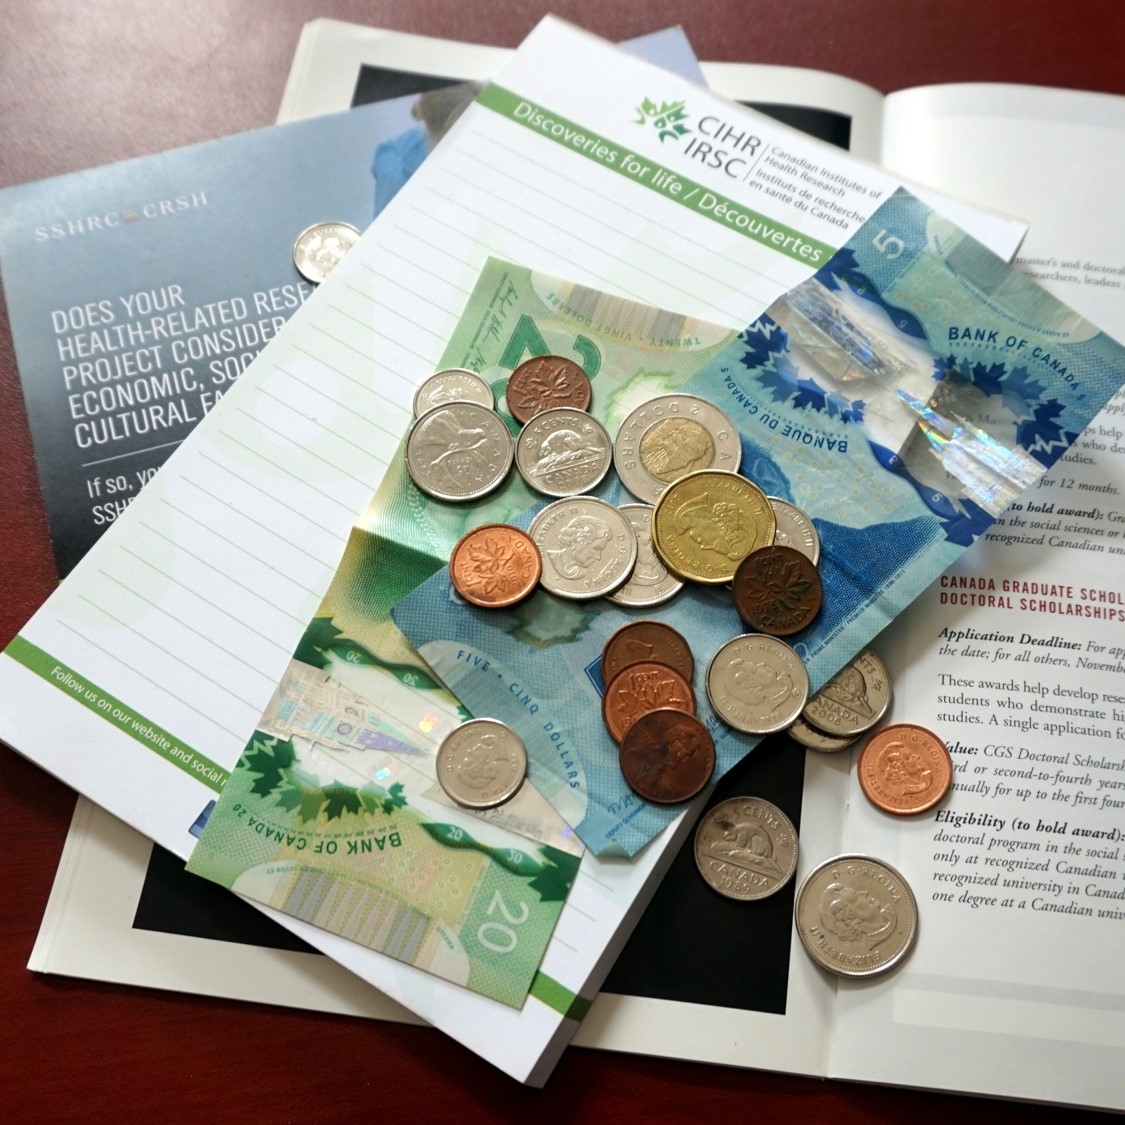 Canadian bills and coins lie scattered on a table with brochures